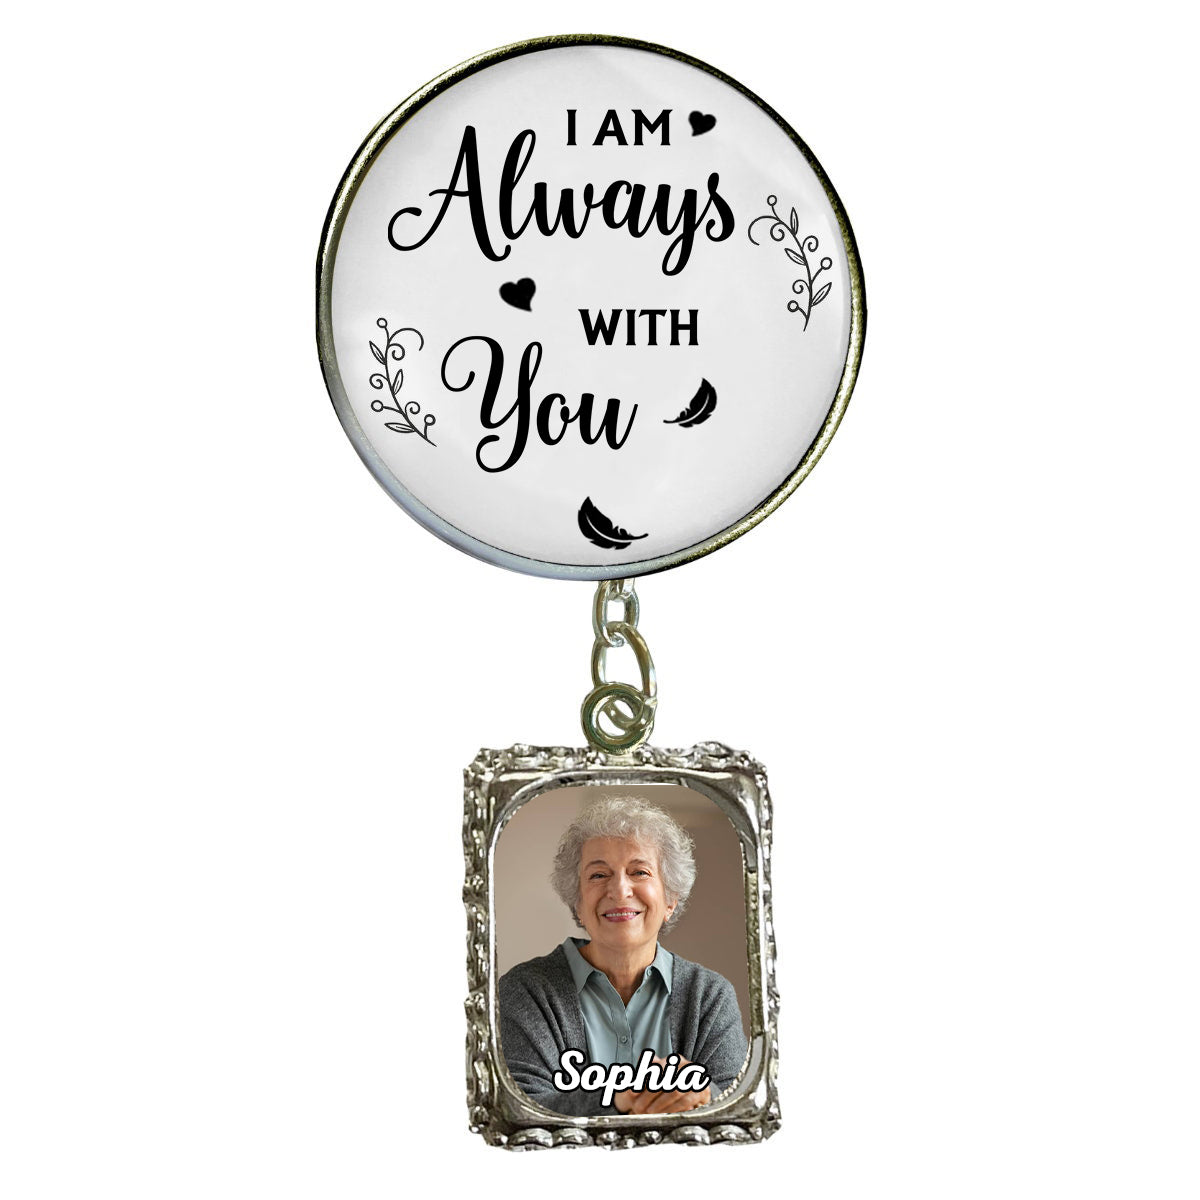 Personalized Memorial Photo Frame Charm Boutonniere Pin-Gift For Family